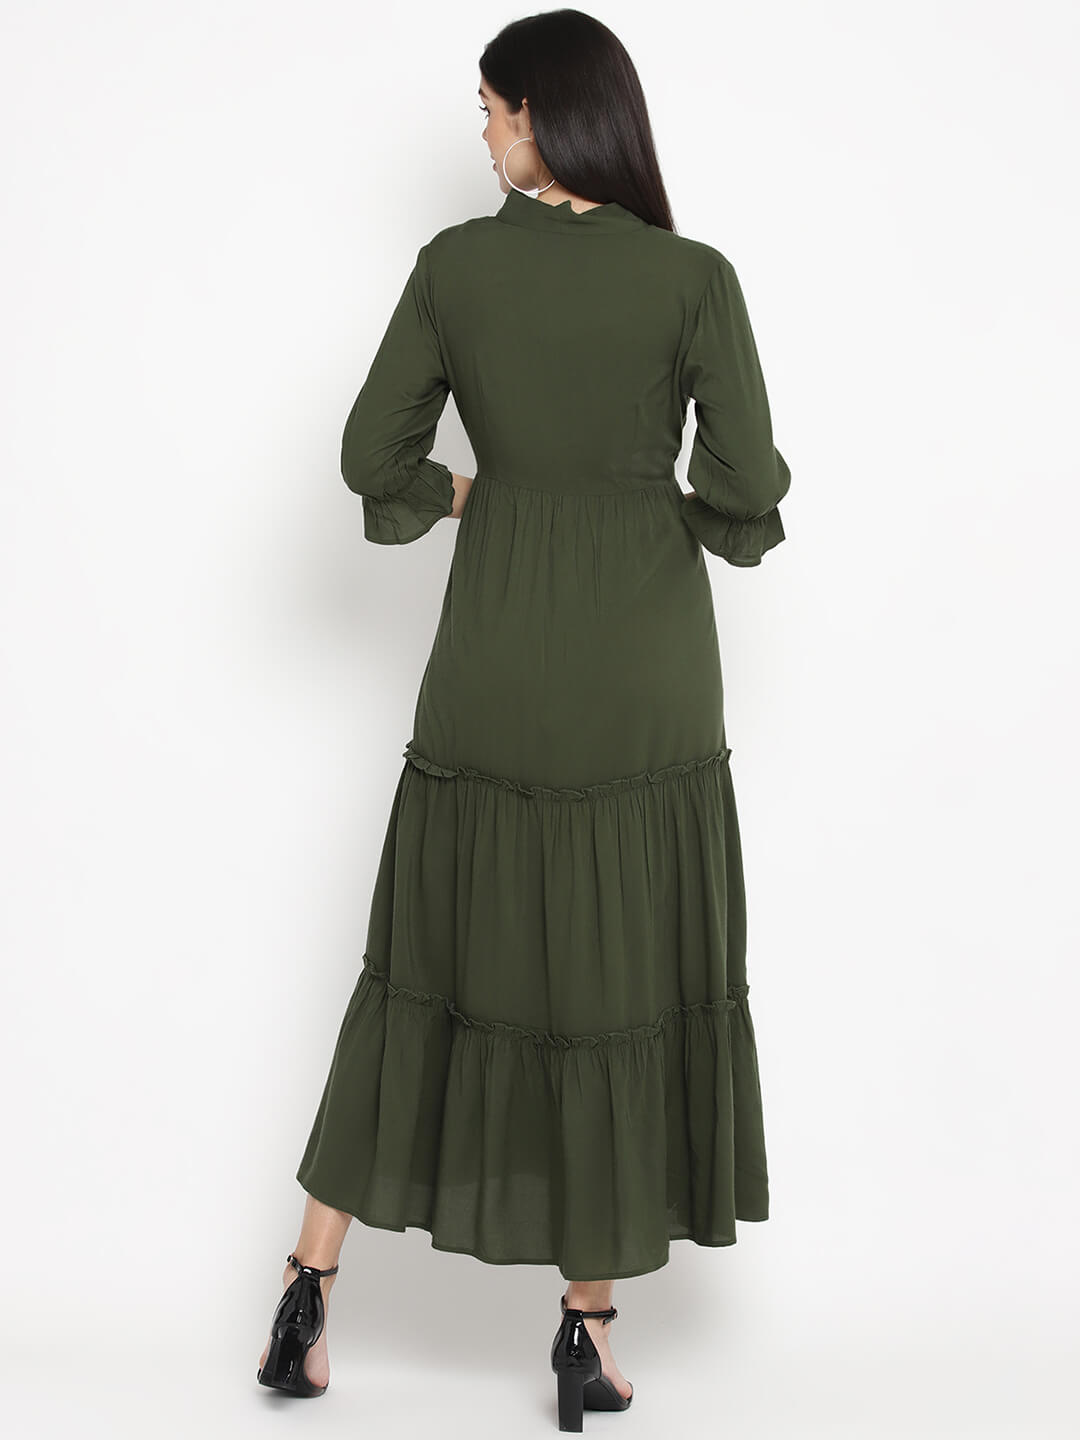 Msfq Olive Solid Maxi Dress With Tie Knot